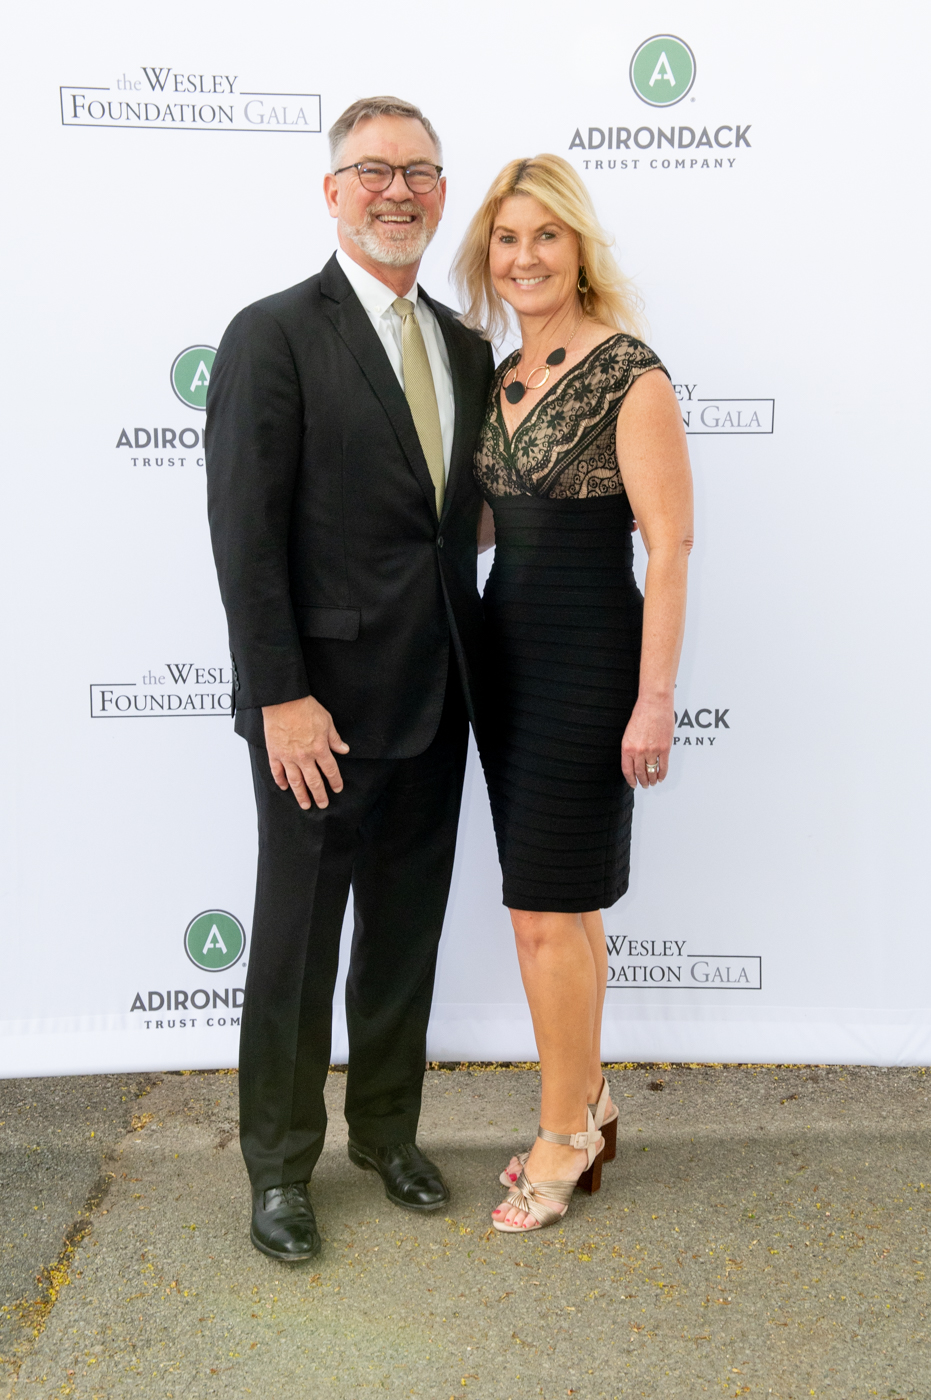 A couple posing for a picture, a man on the left wearing a black suit and a woman on the right wearing a black dress